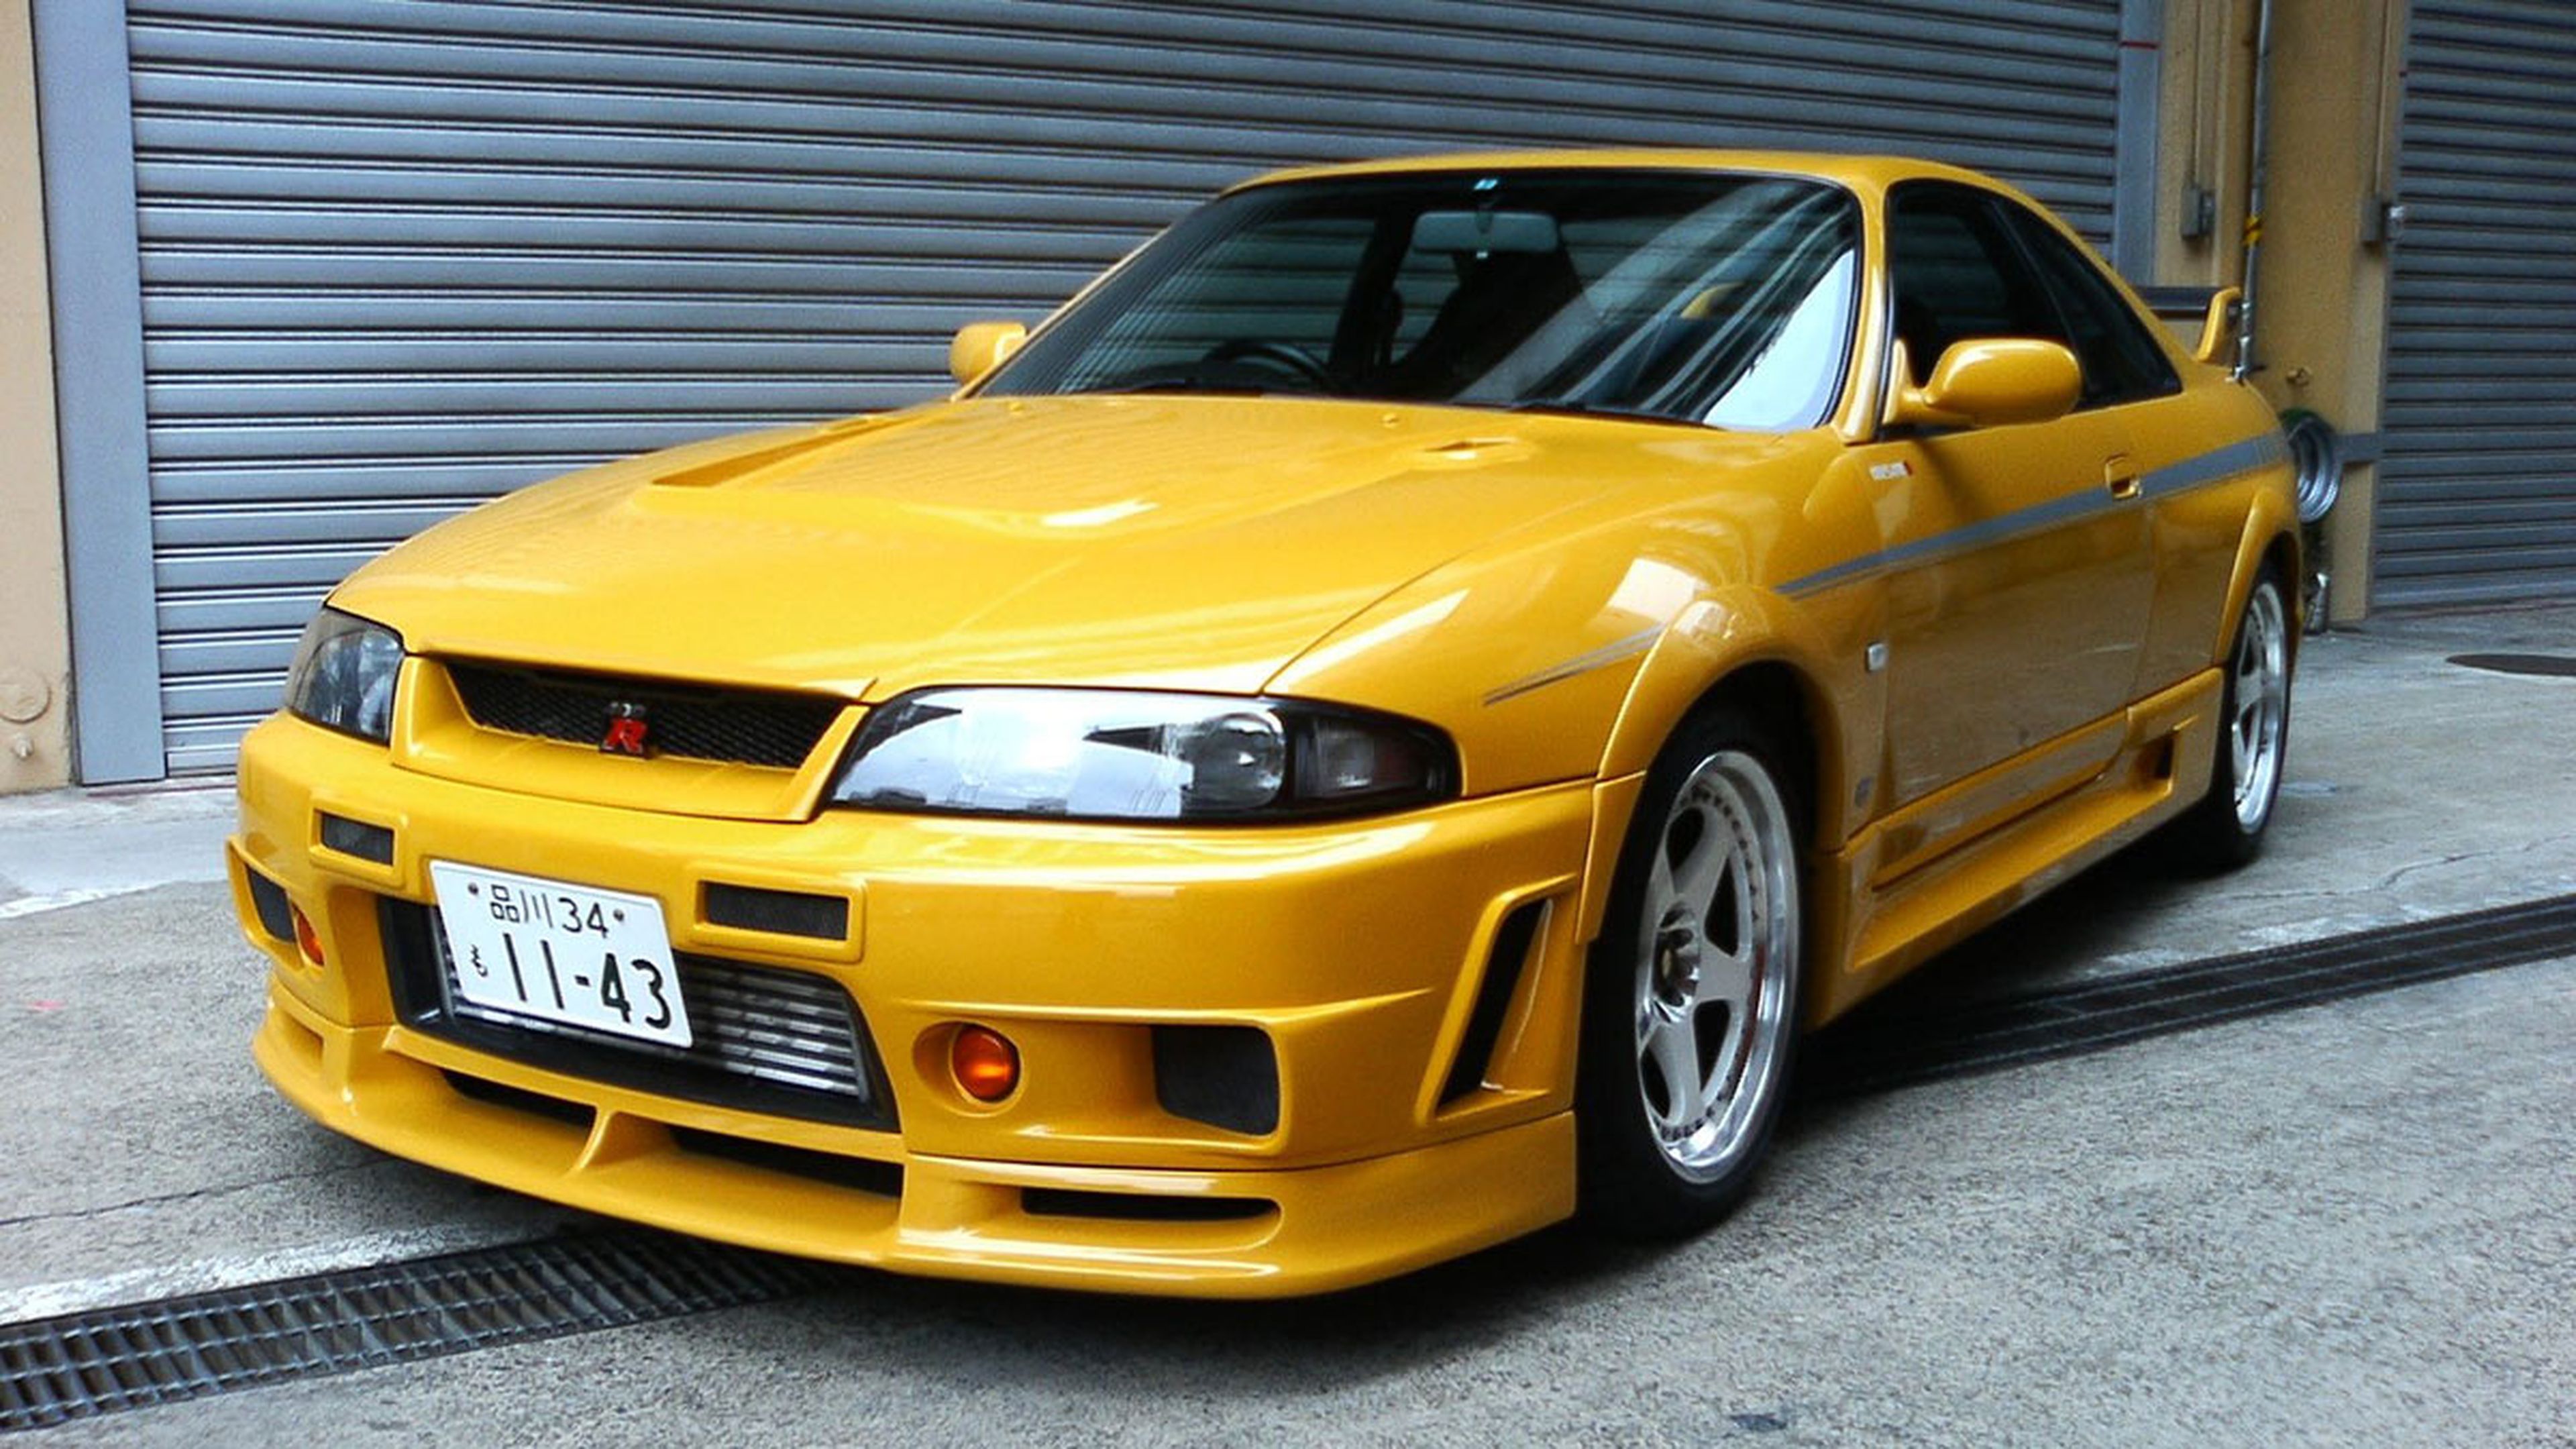 Nissan Skyline GT-R R33 Fast and Furious